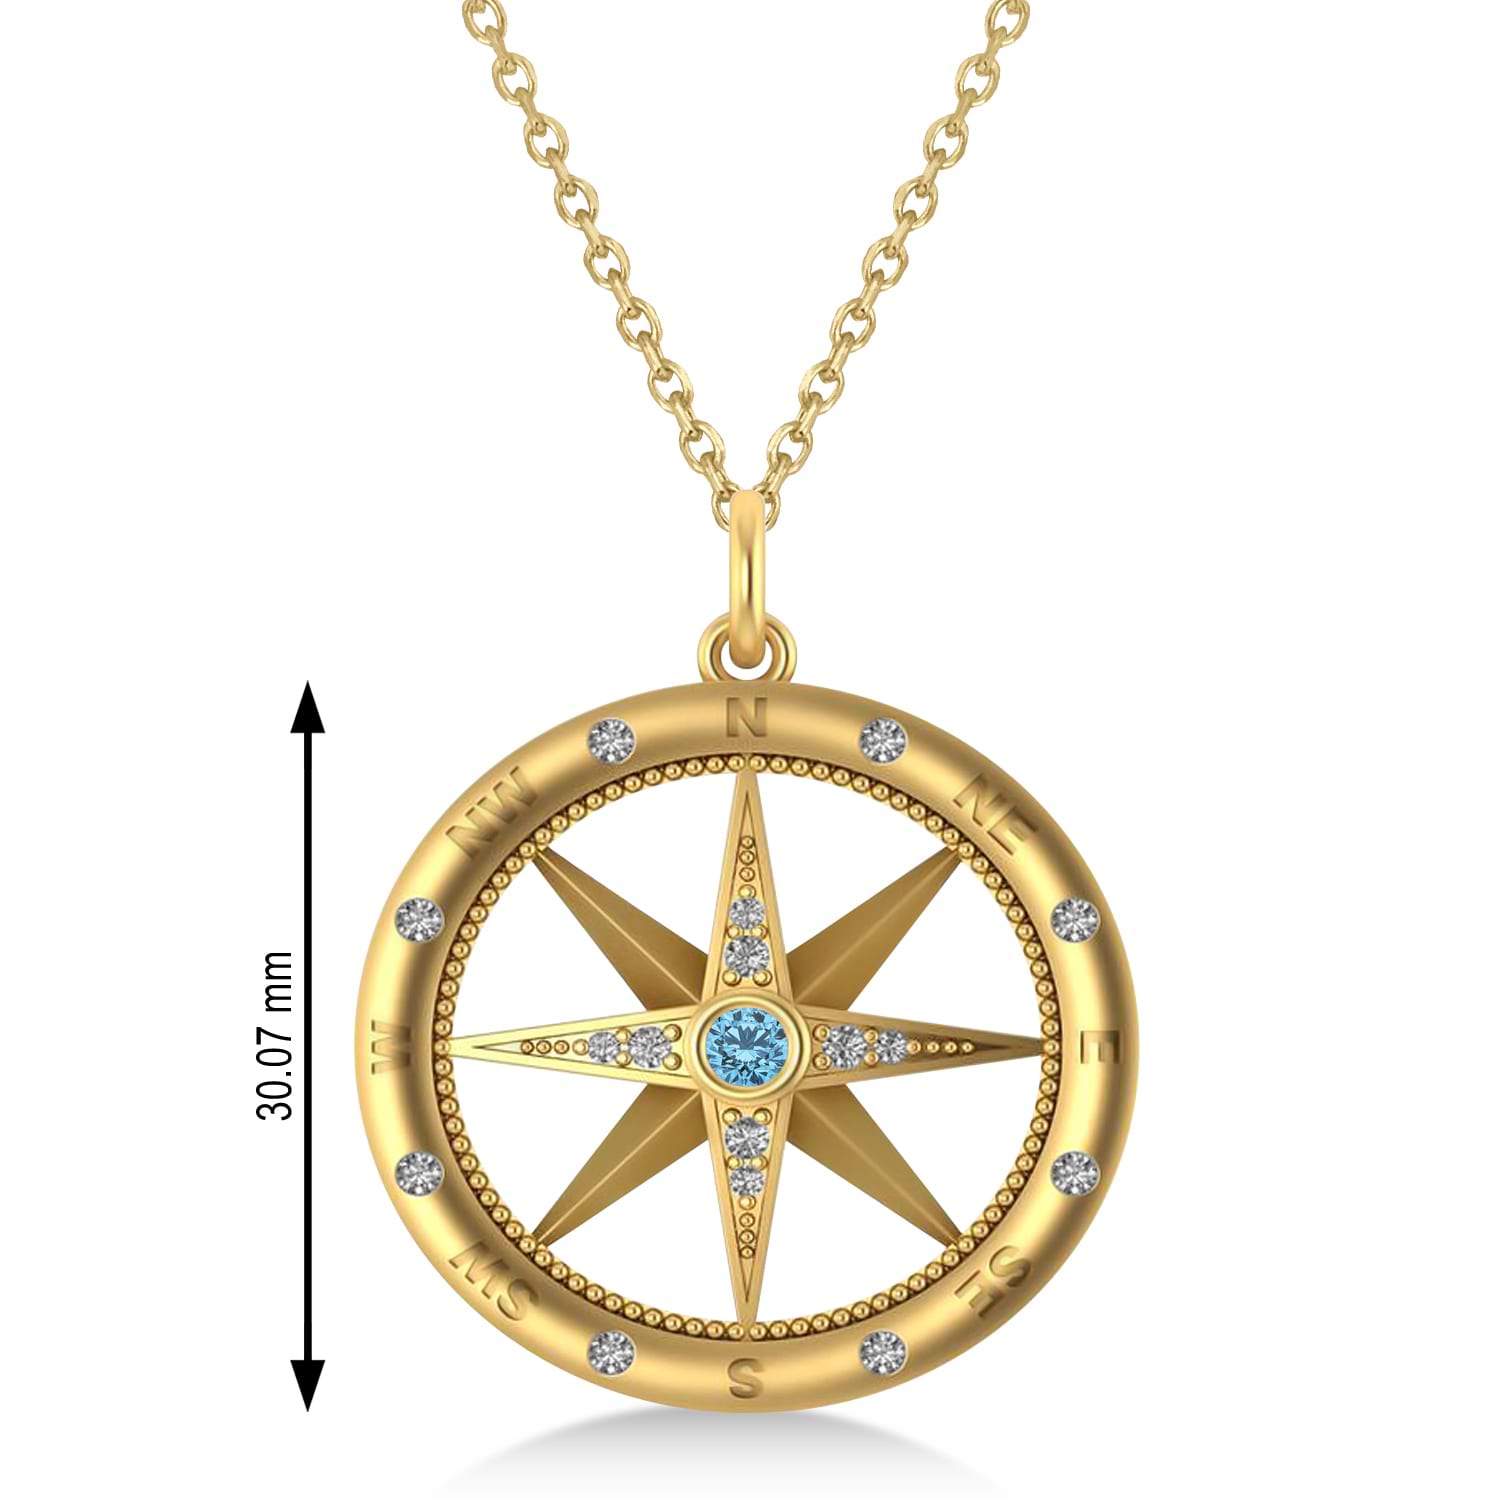 Large Compass Pendant For Men Blue Topaz & Diamond Accented 14k Yellow Gold (0.38ct)